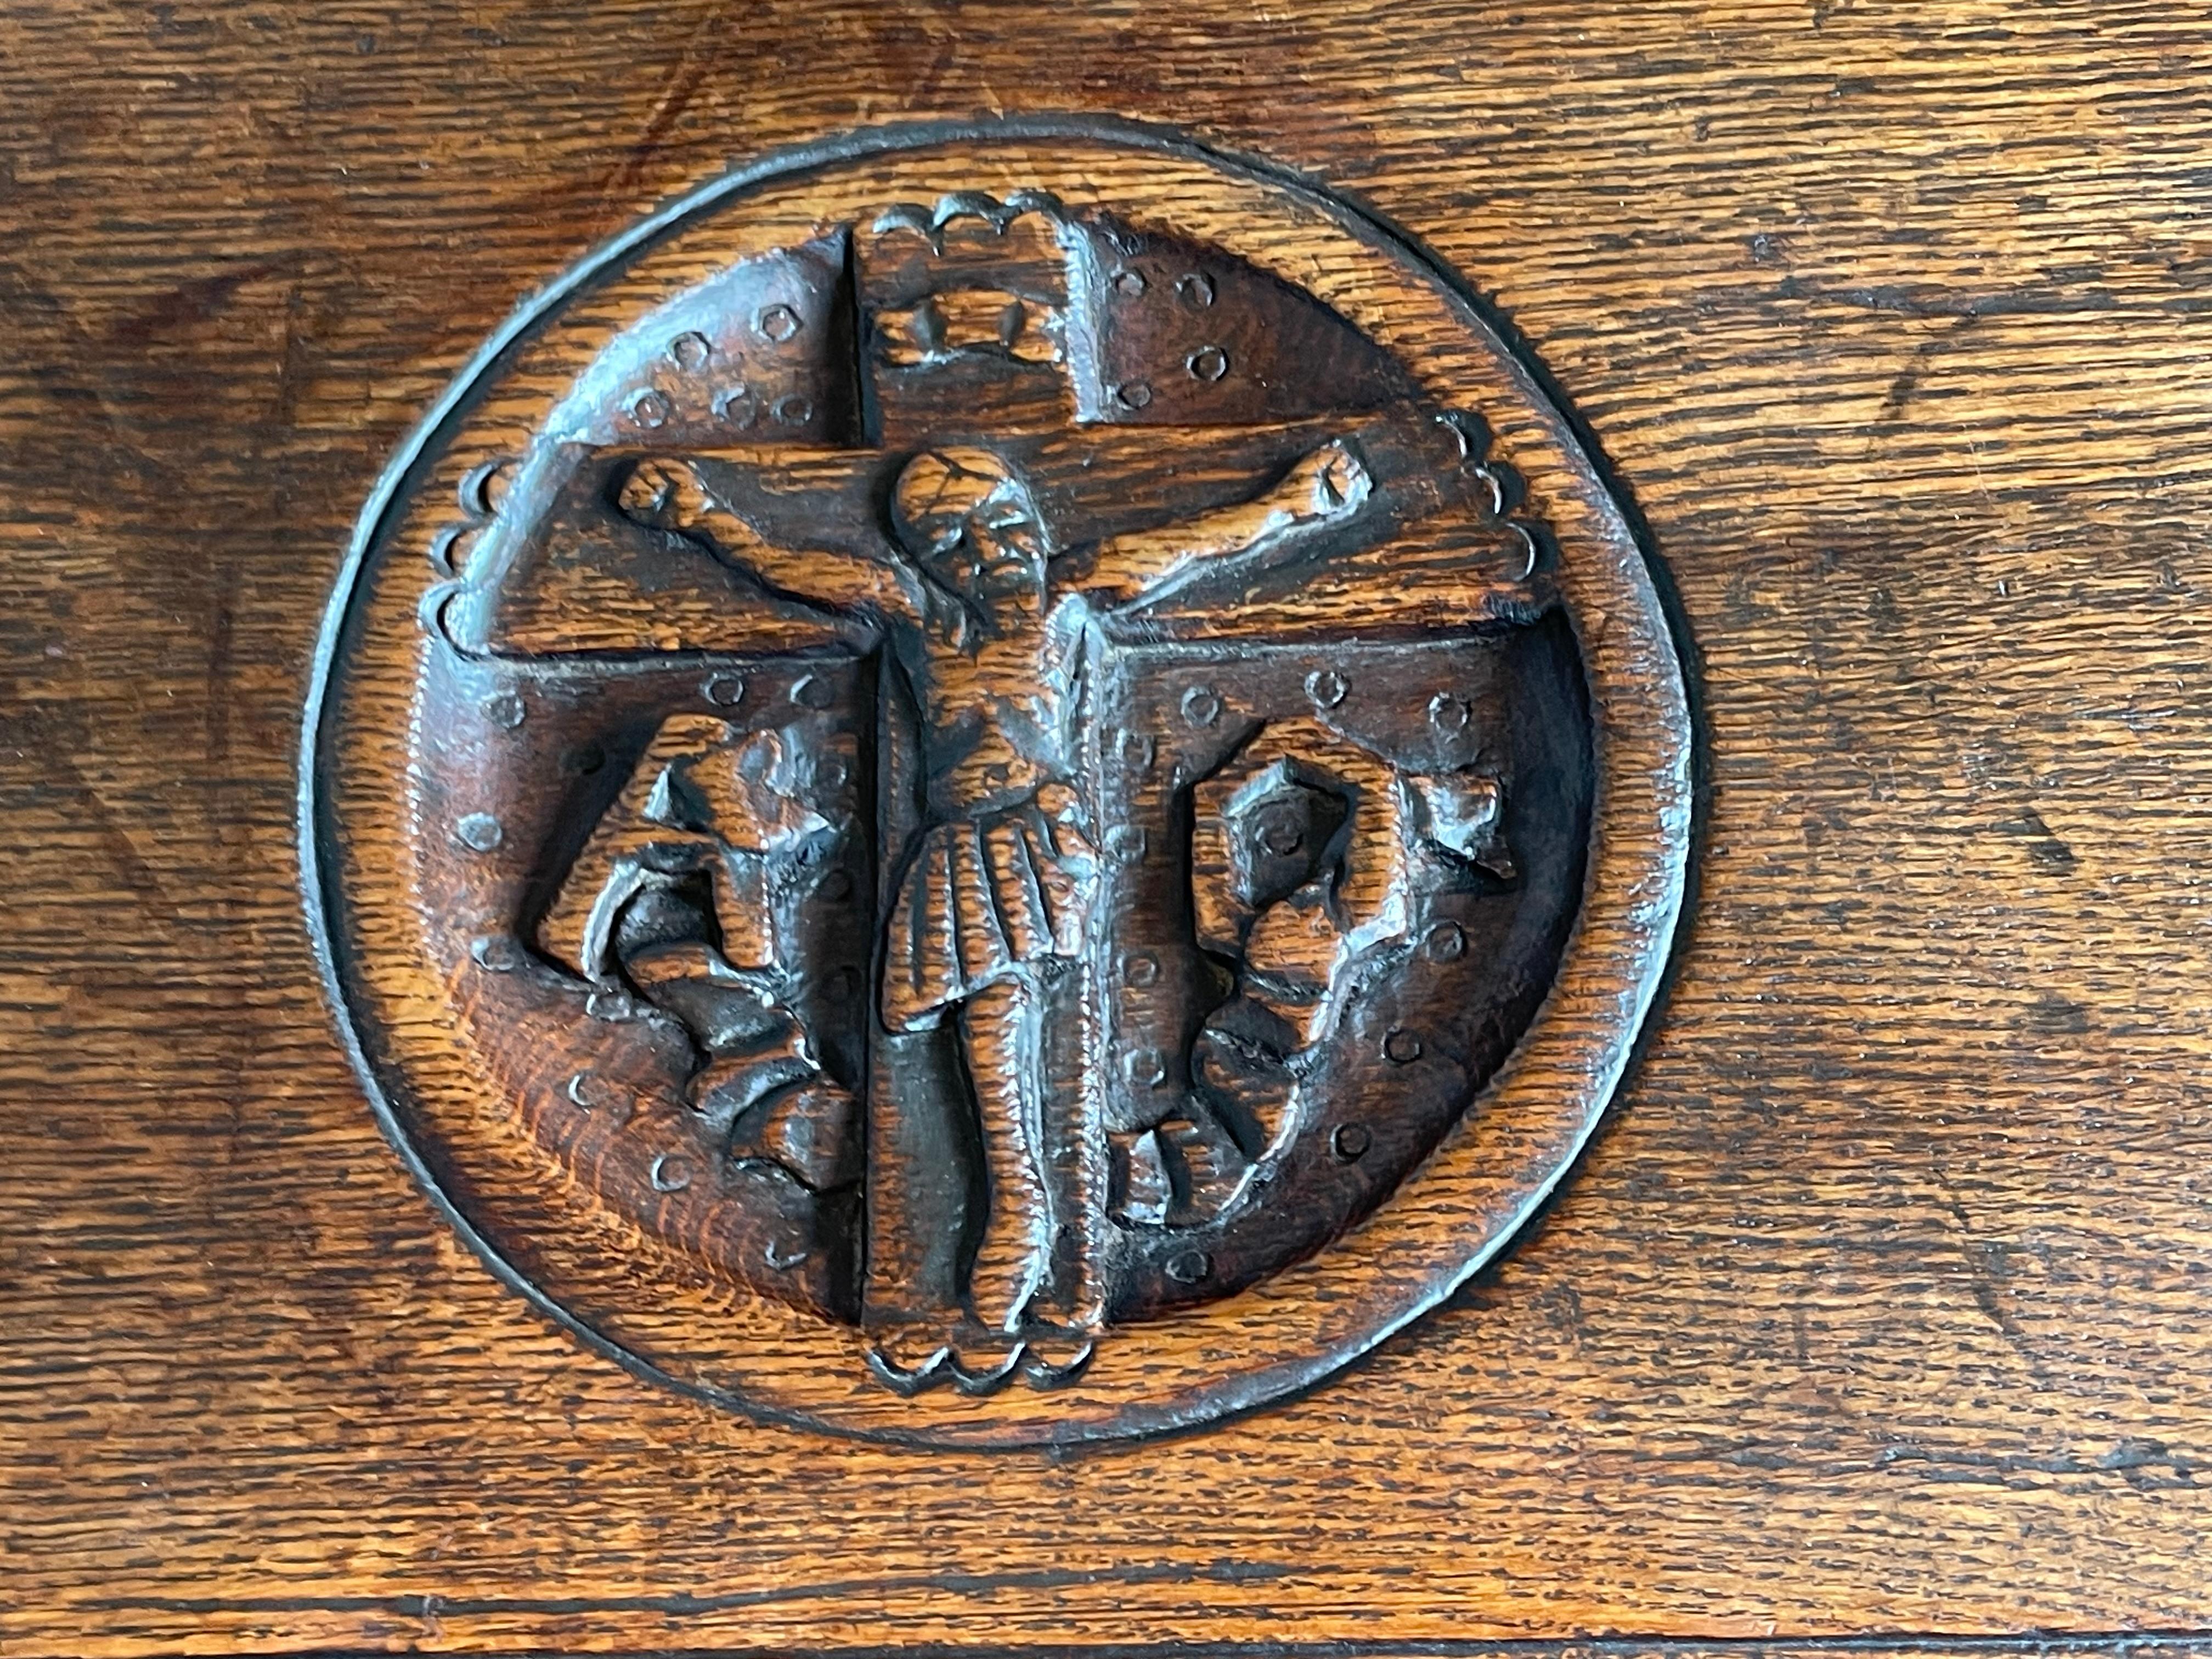 Forged Gothic Revival Stool / Bench with Hand Carved Christ on Crucifix Sculpture 1800s For Sale